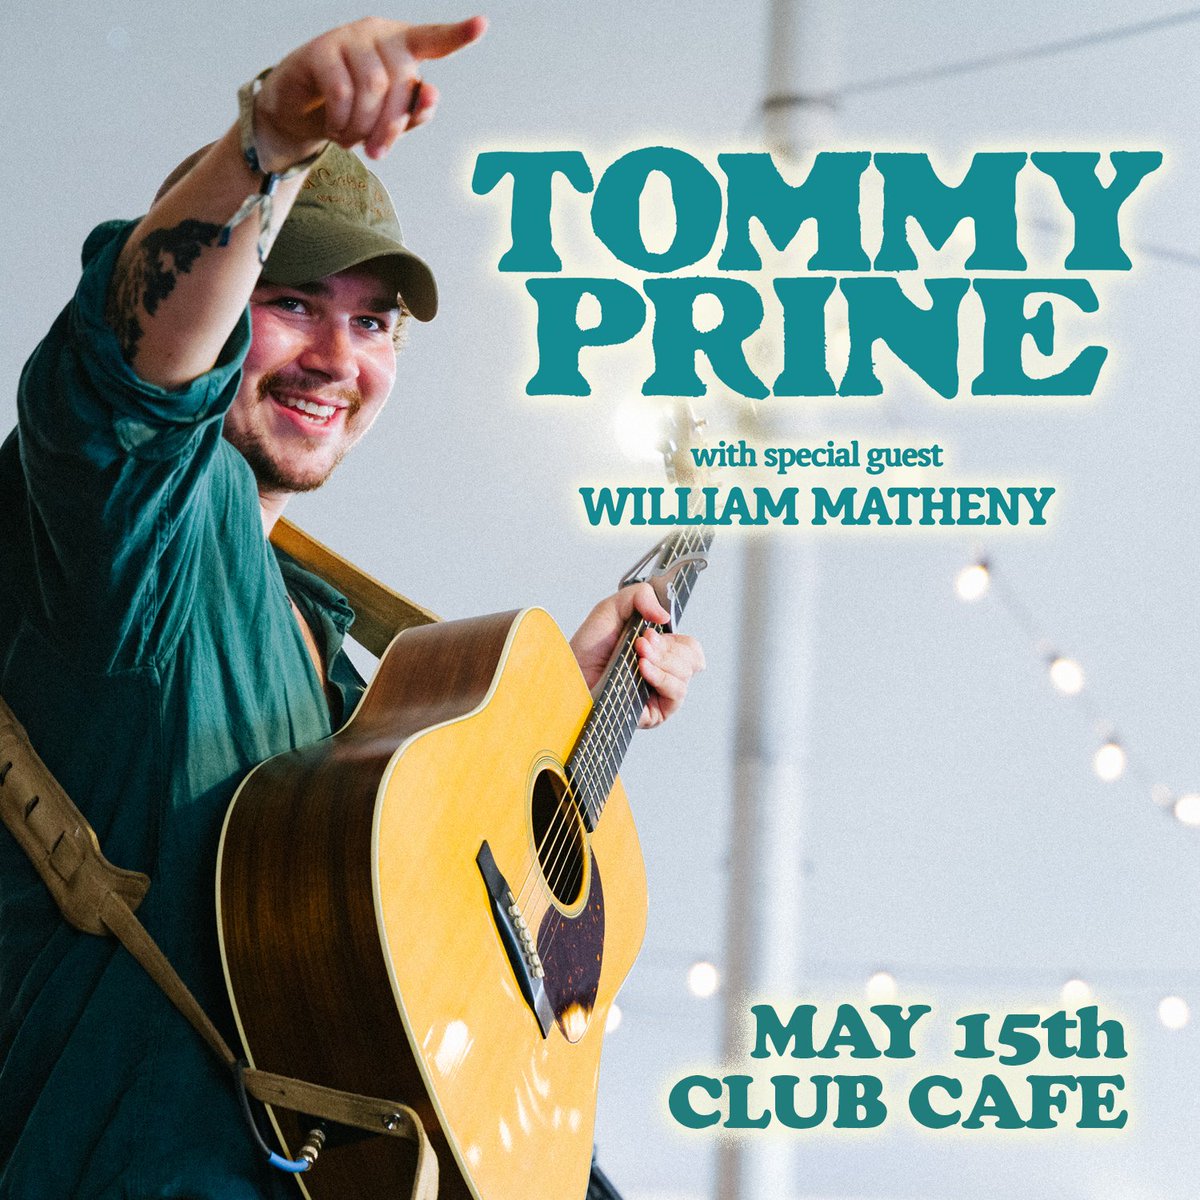 🎶 TONIGHT🎶

05/15 | @TommyPrine with special guest @William_Matheny | @ClubCafeLive

🎟️ Buy Tixs: tinyurl.com/3p3r9erc
Doors: 7:00PM

Tickets are available for purchase online or at the door. 
#tonight #pghconcerts #clubcafe #clubcafelive #livemusic #music